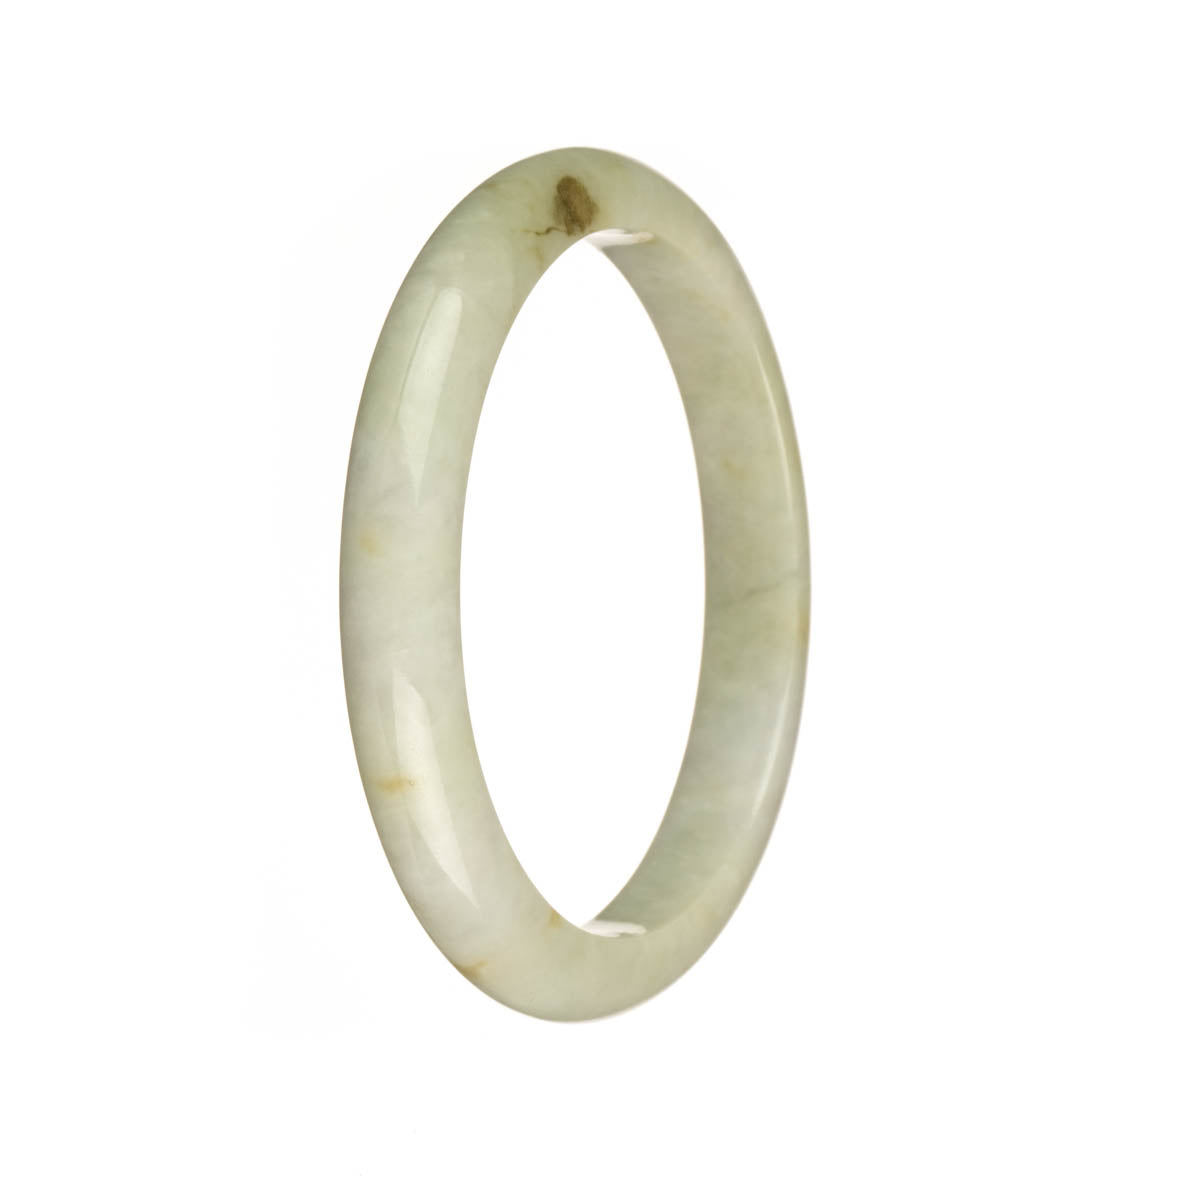 Genuine Grade A White with Brown Spots Traditional Jade Bracelet - 56mm Semi Round